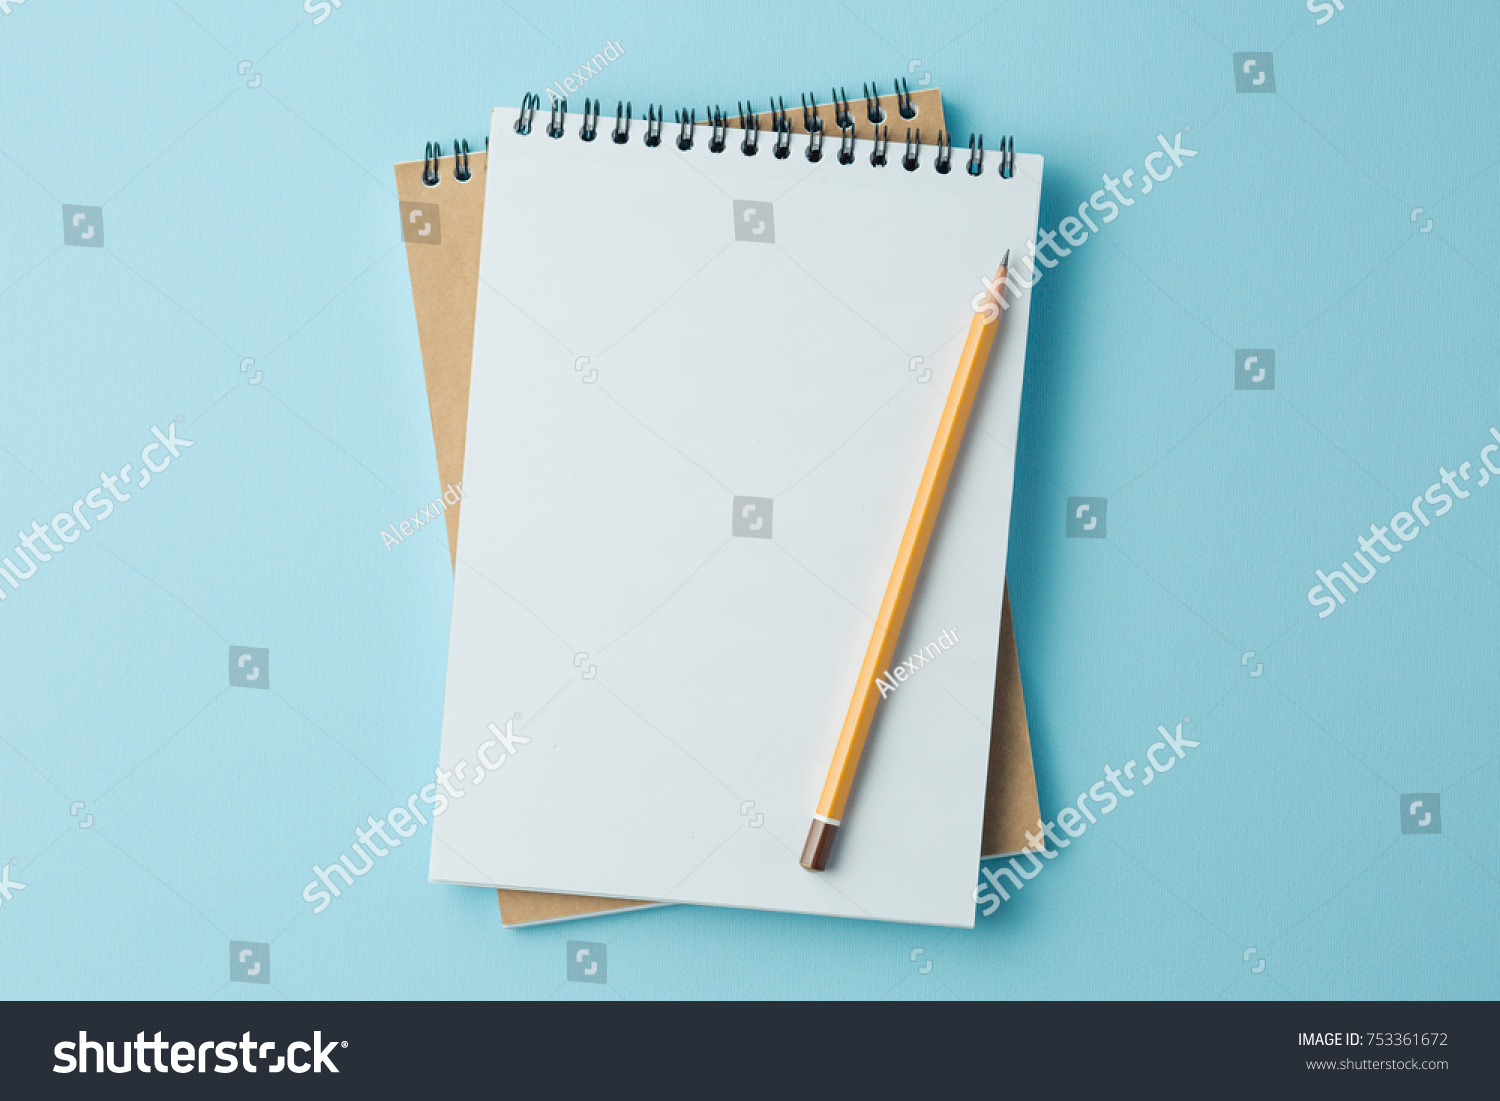 school notebook on a blue background, spiral notepad on a table #753361672